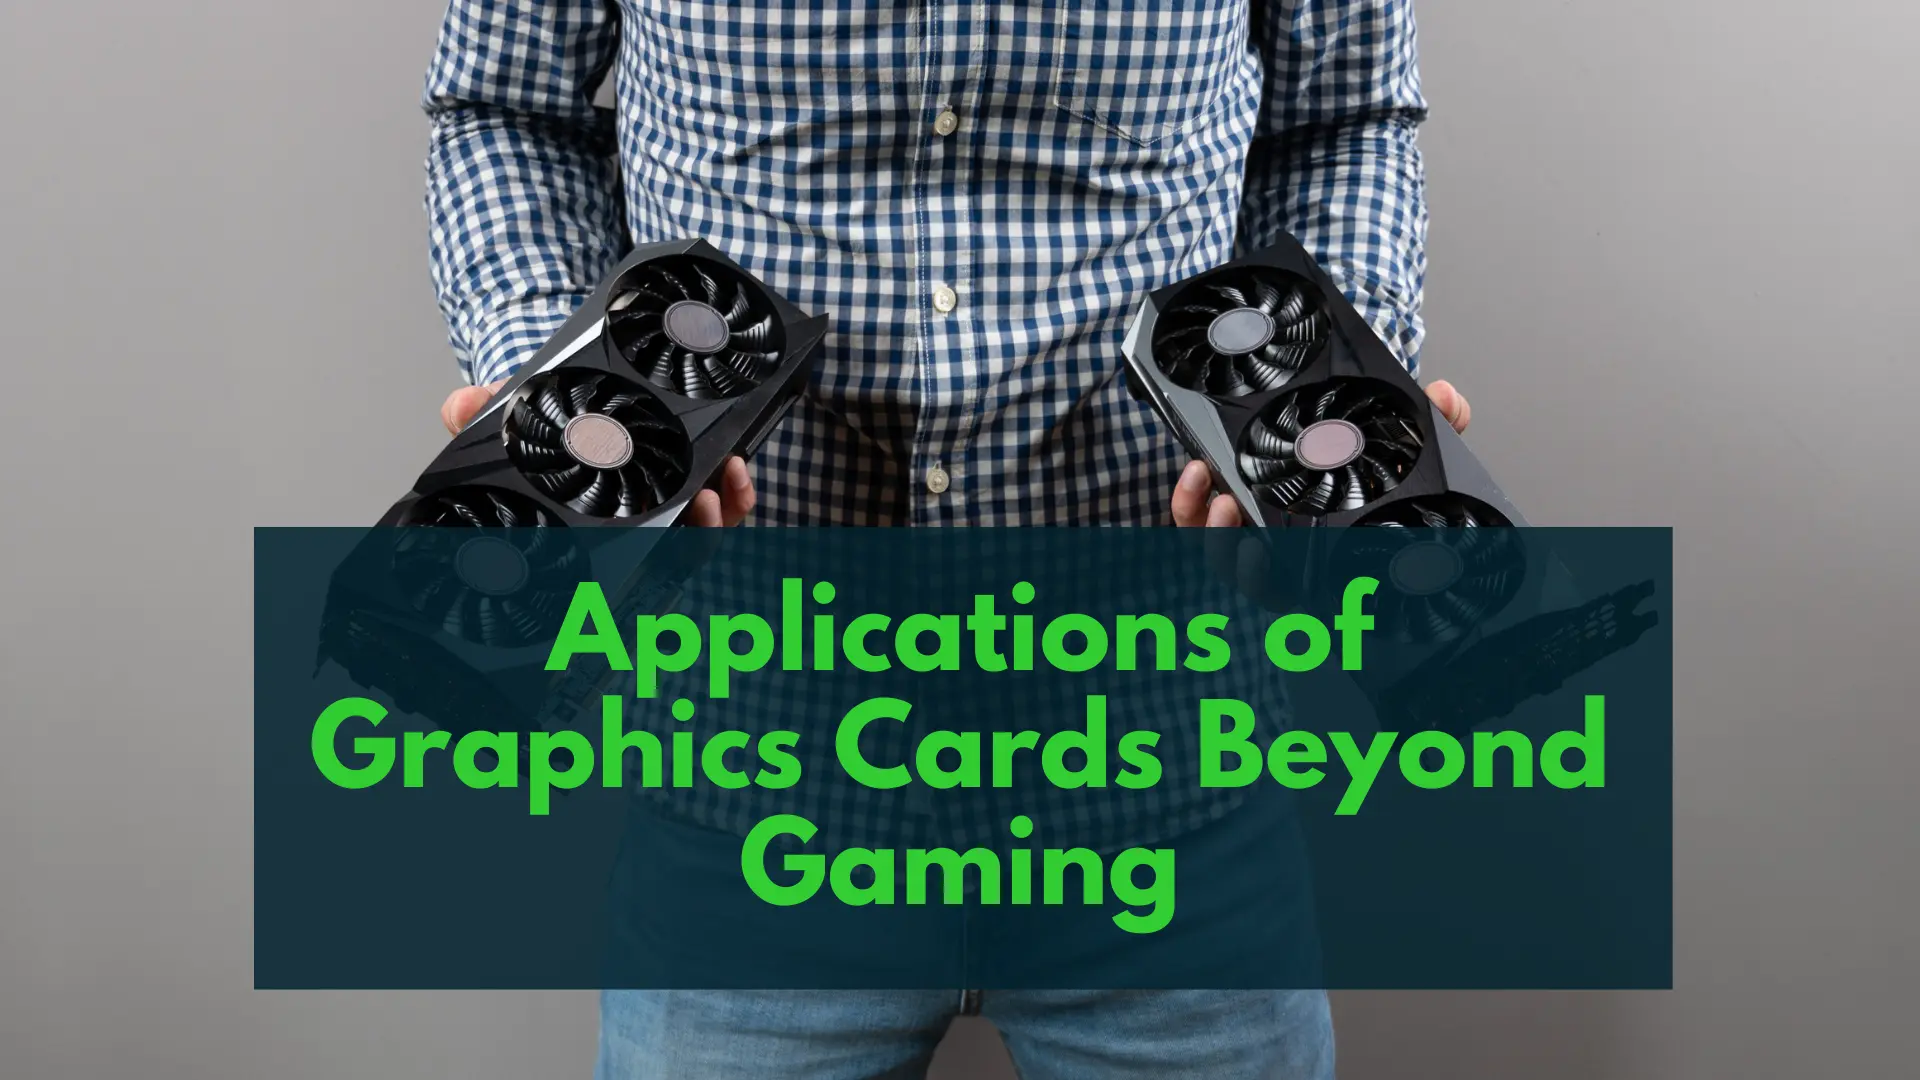 Applications of Graphics Cards Beyond Gaming